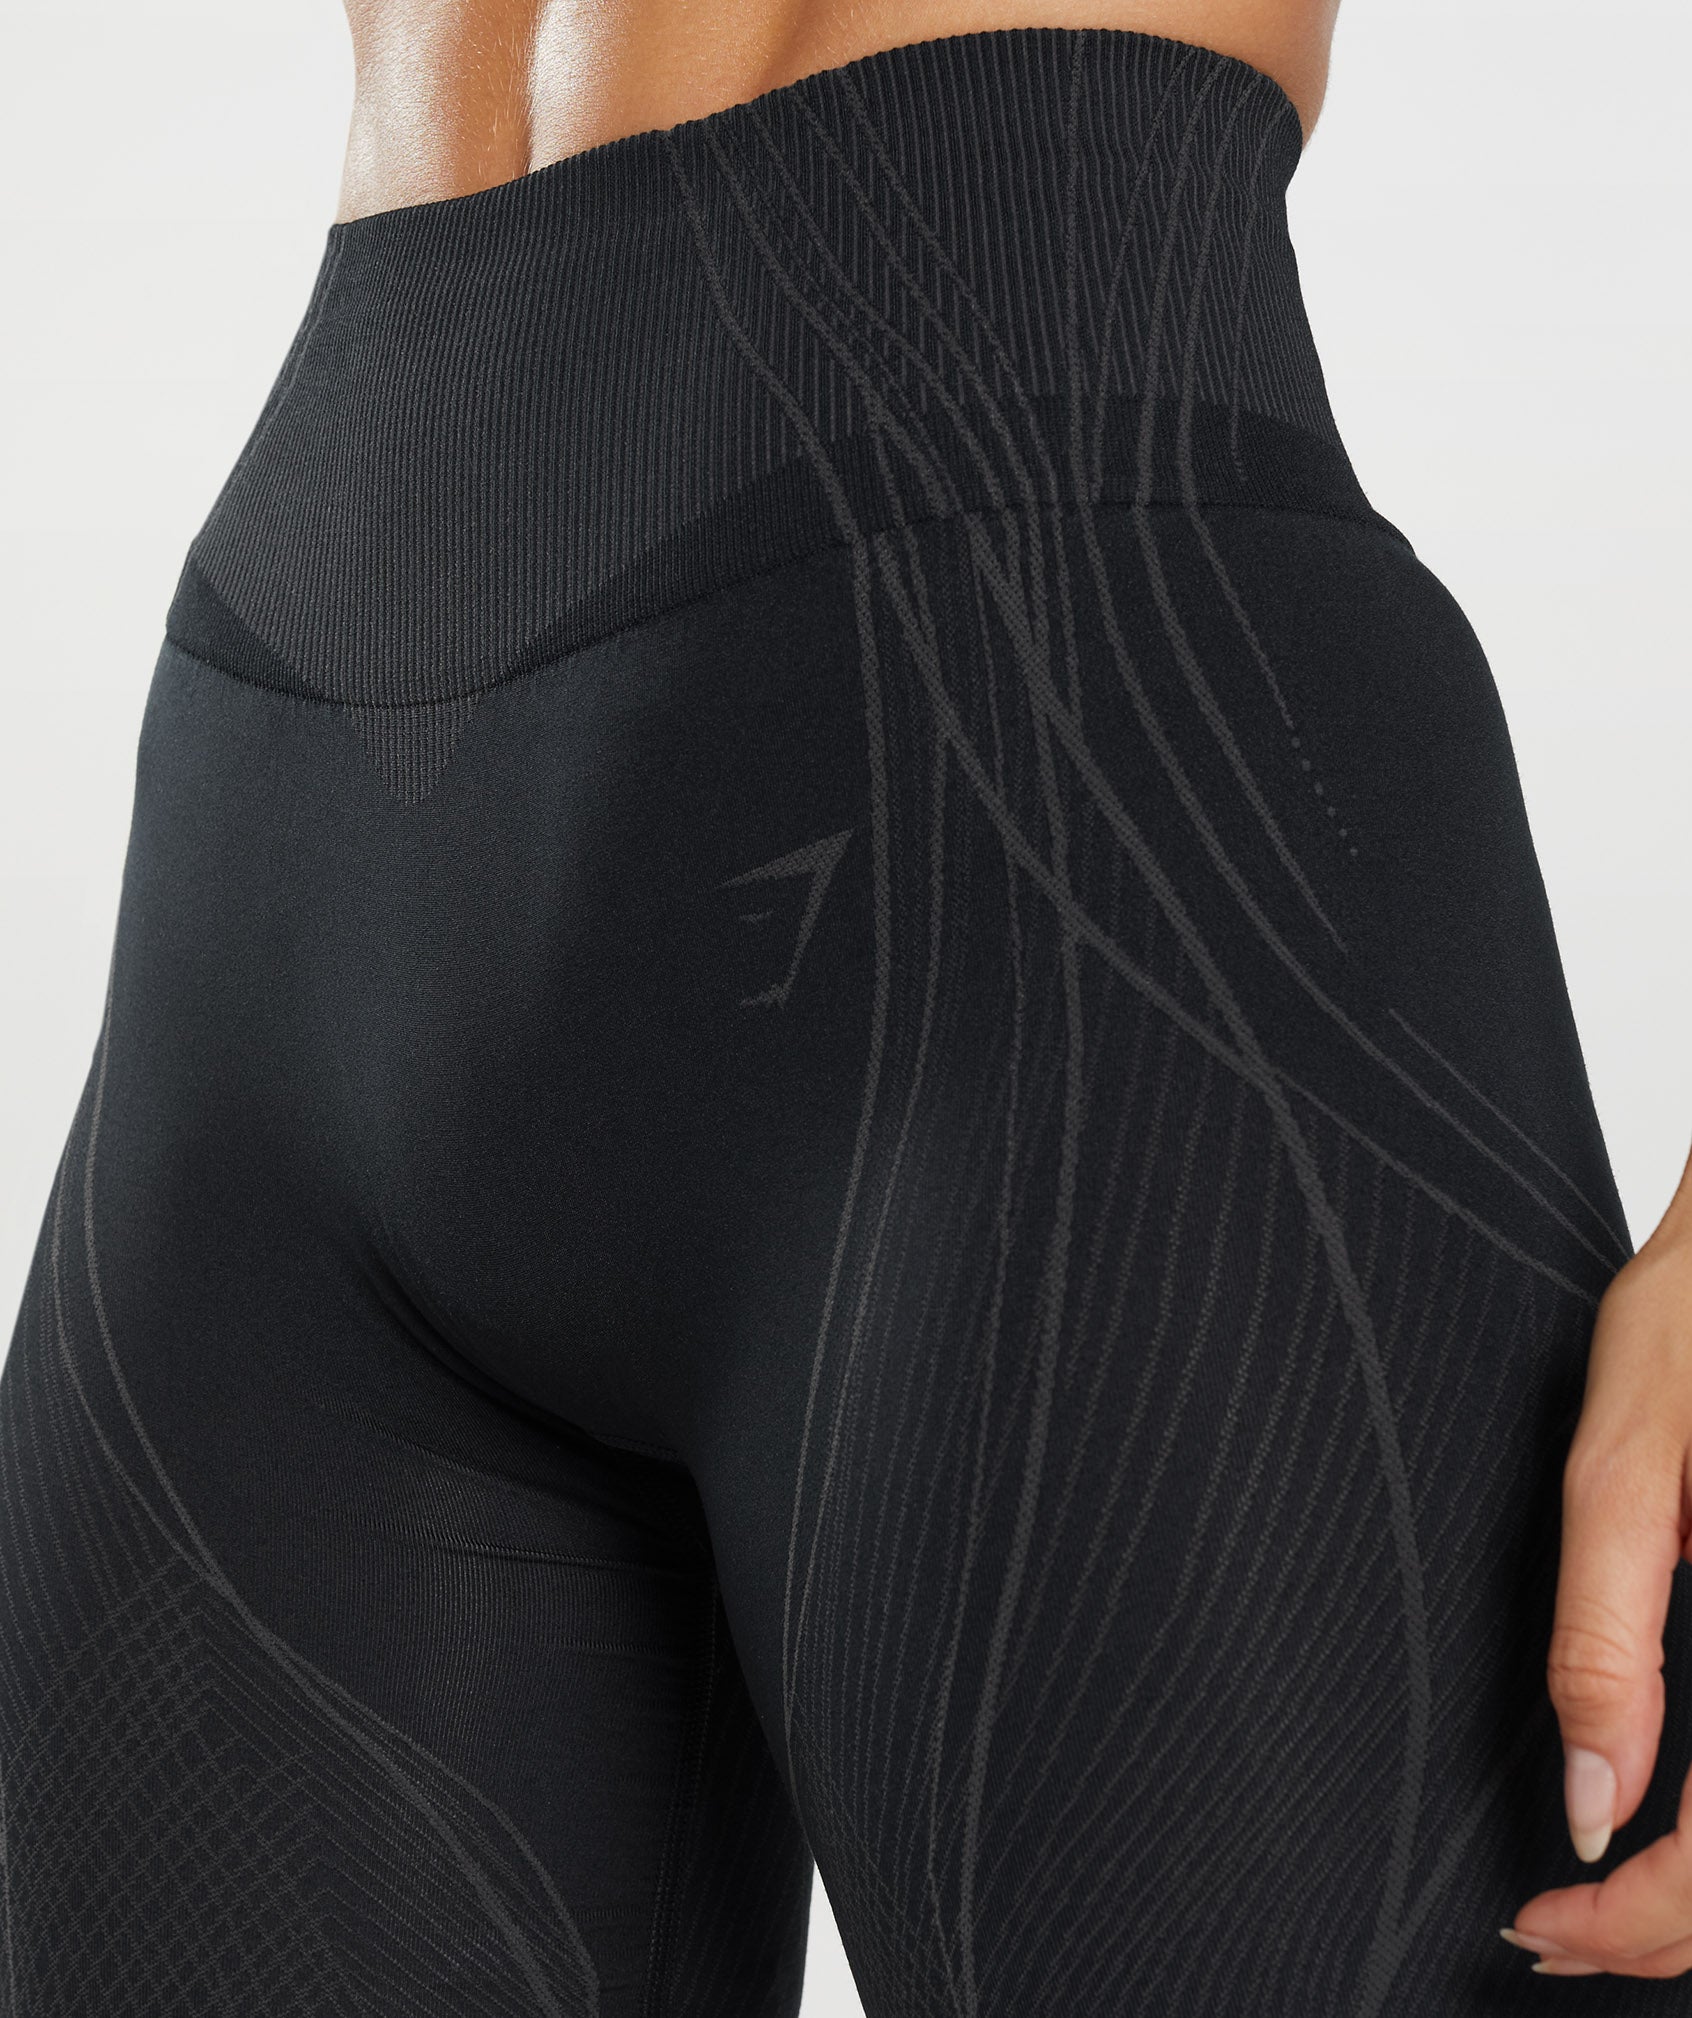 Apex Seamless Shorts in Black/Onyx Grey - view 6